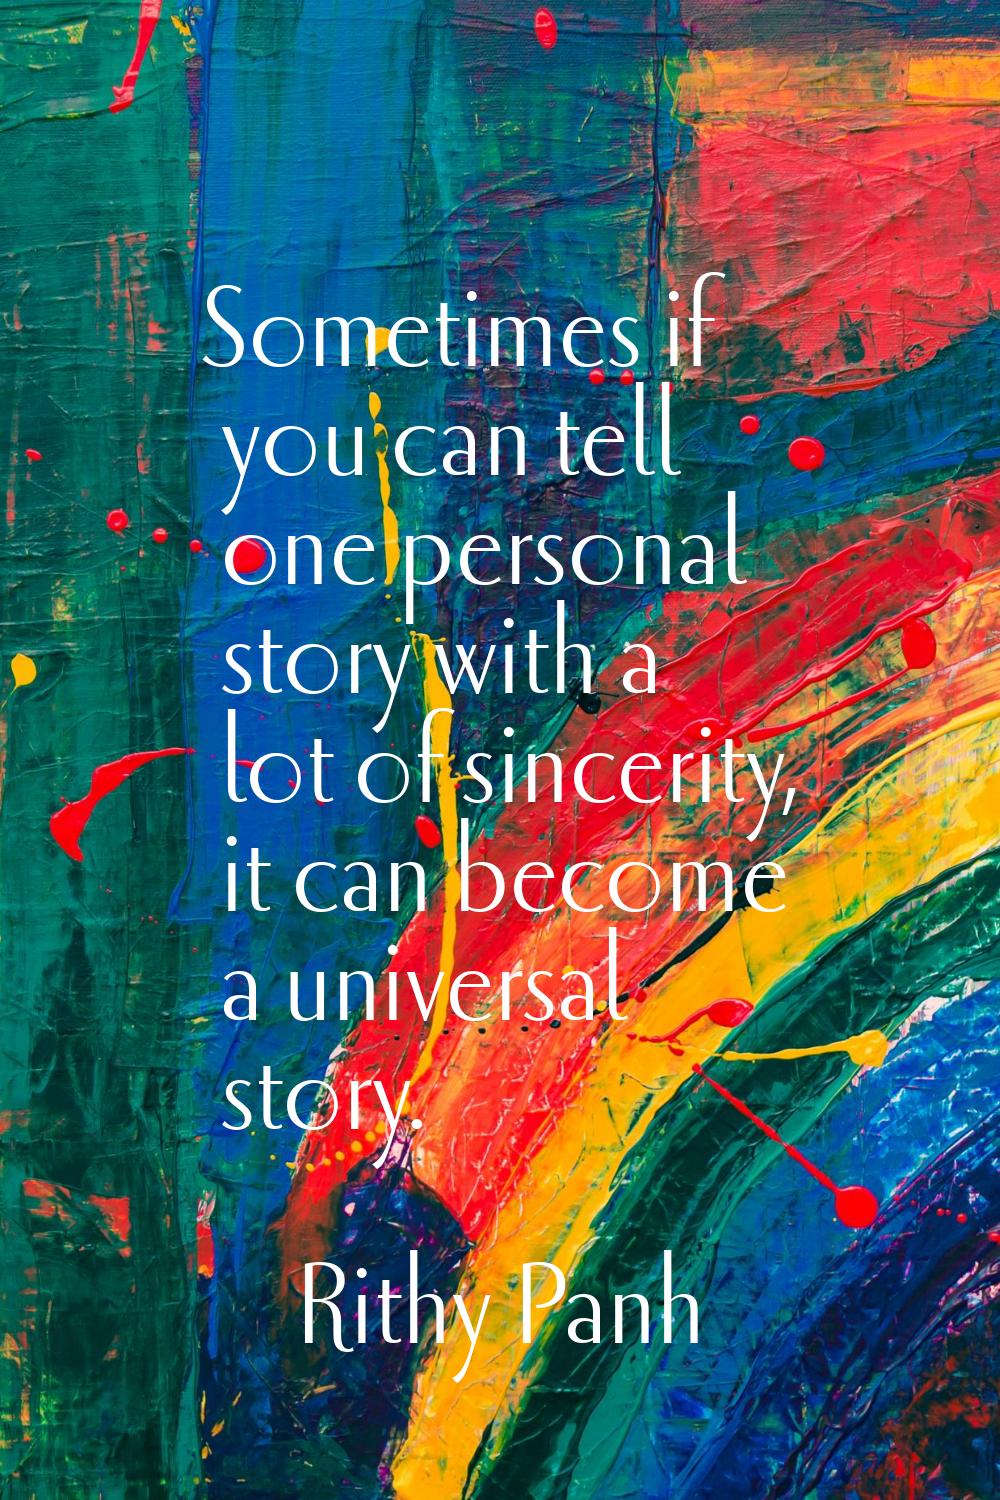 Sometimes if you can tell one personal story with a lot of sincerity, it can become a universal sto